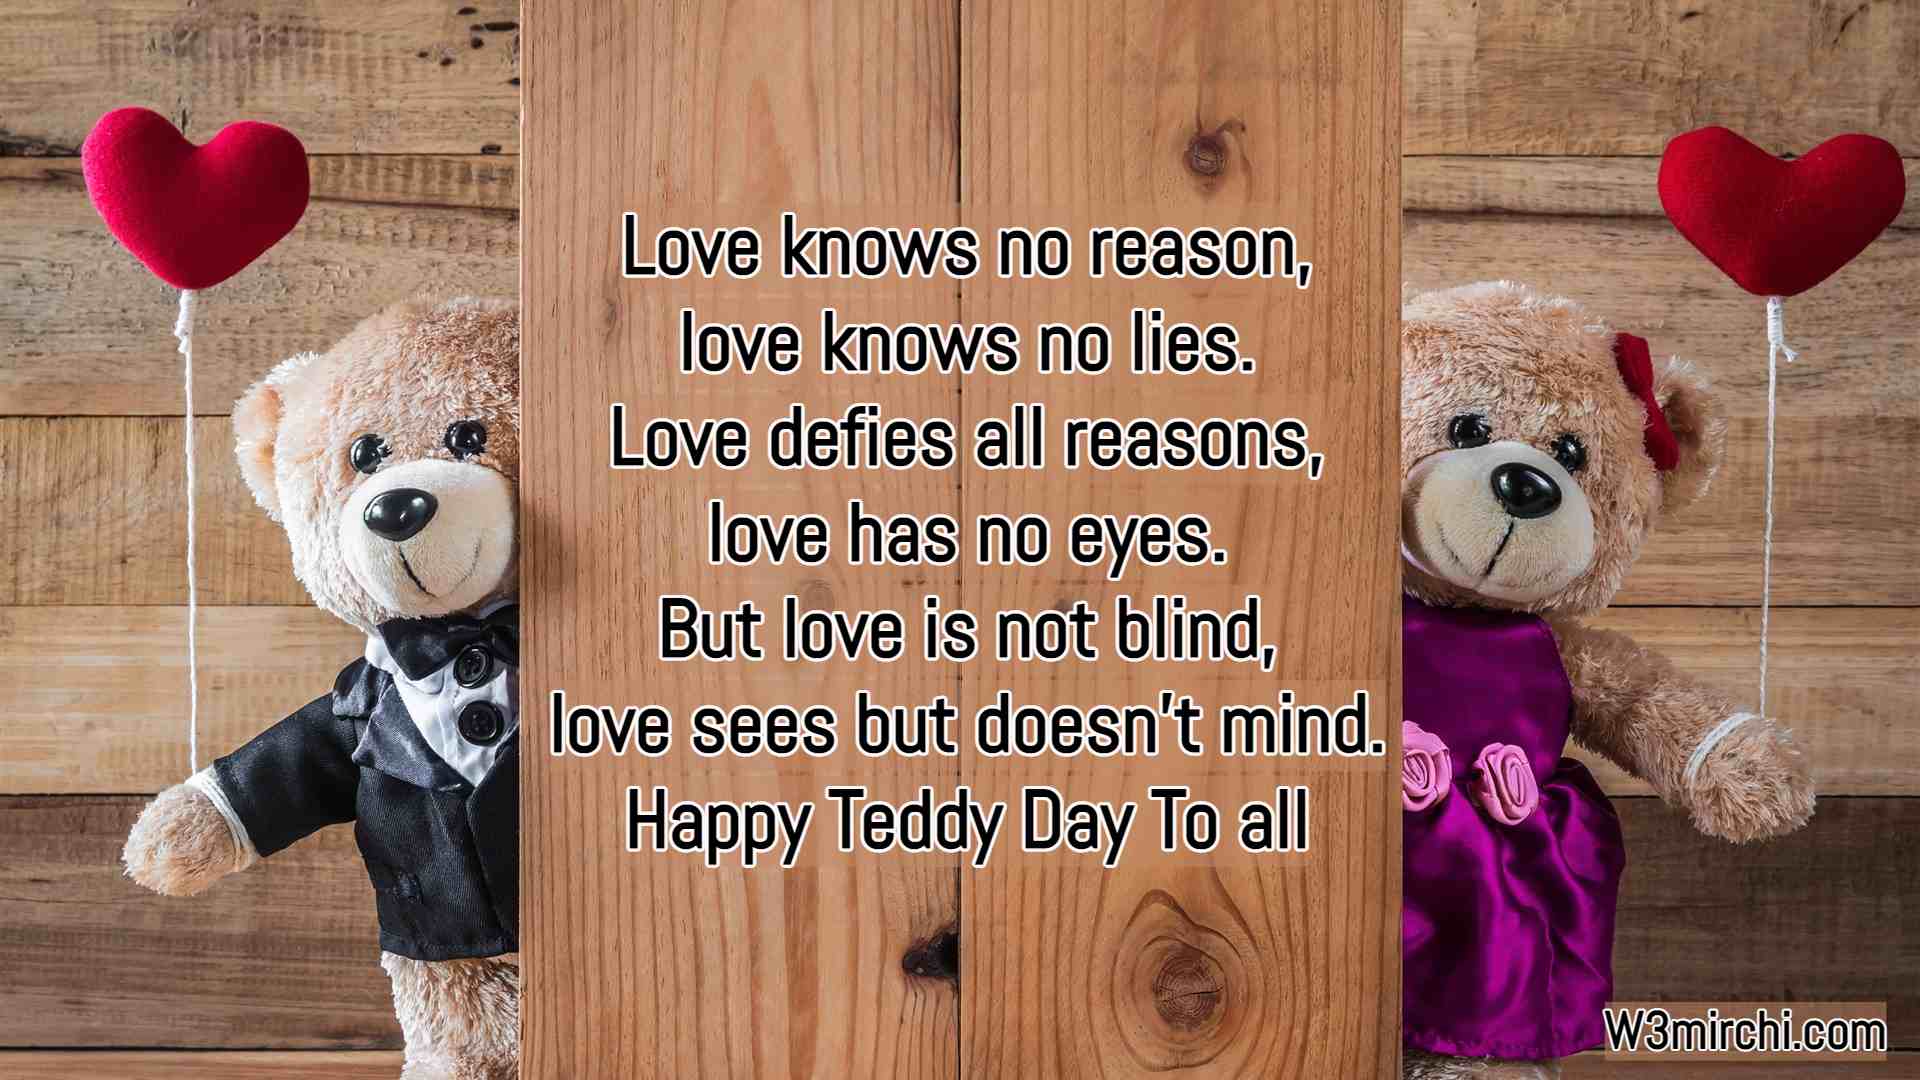 Happy Teddy Day To all